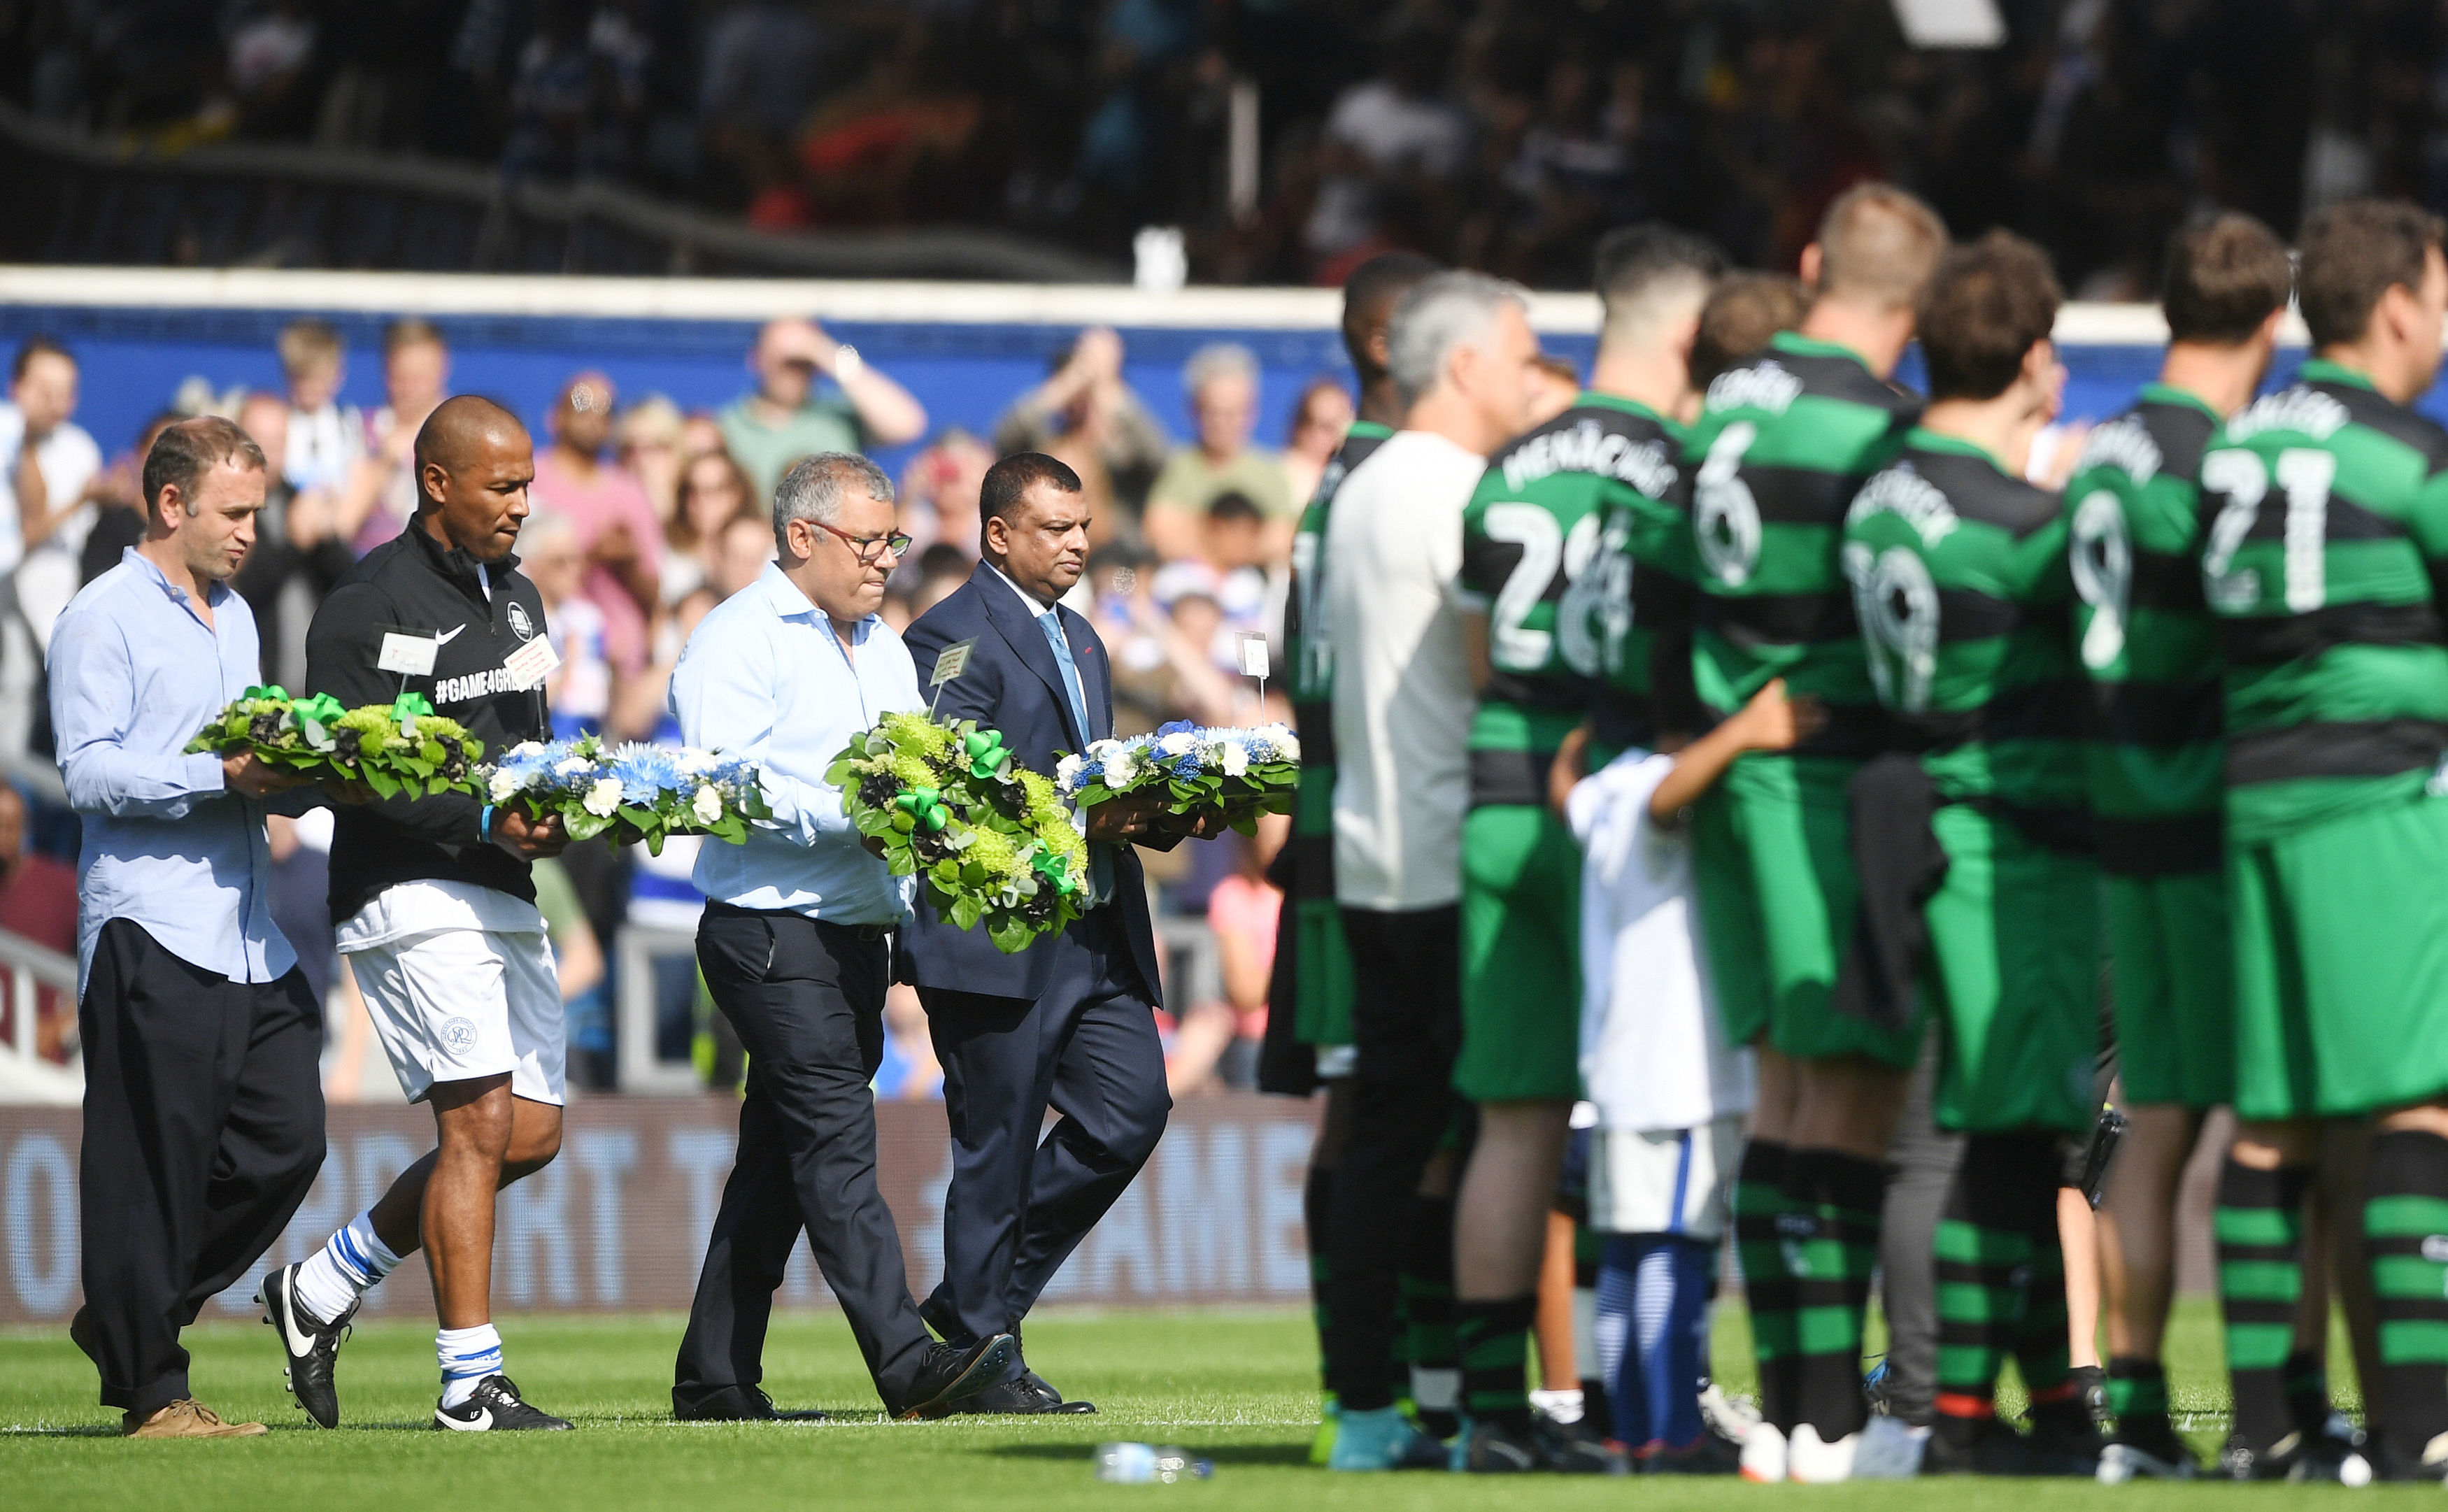 Wreaths are laid at the start of the match